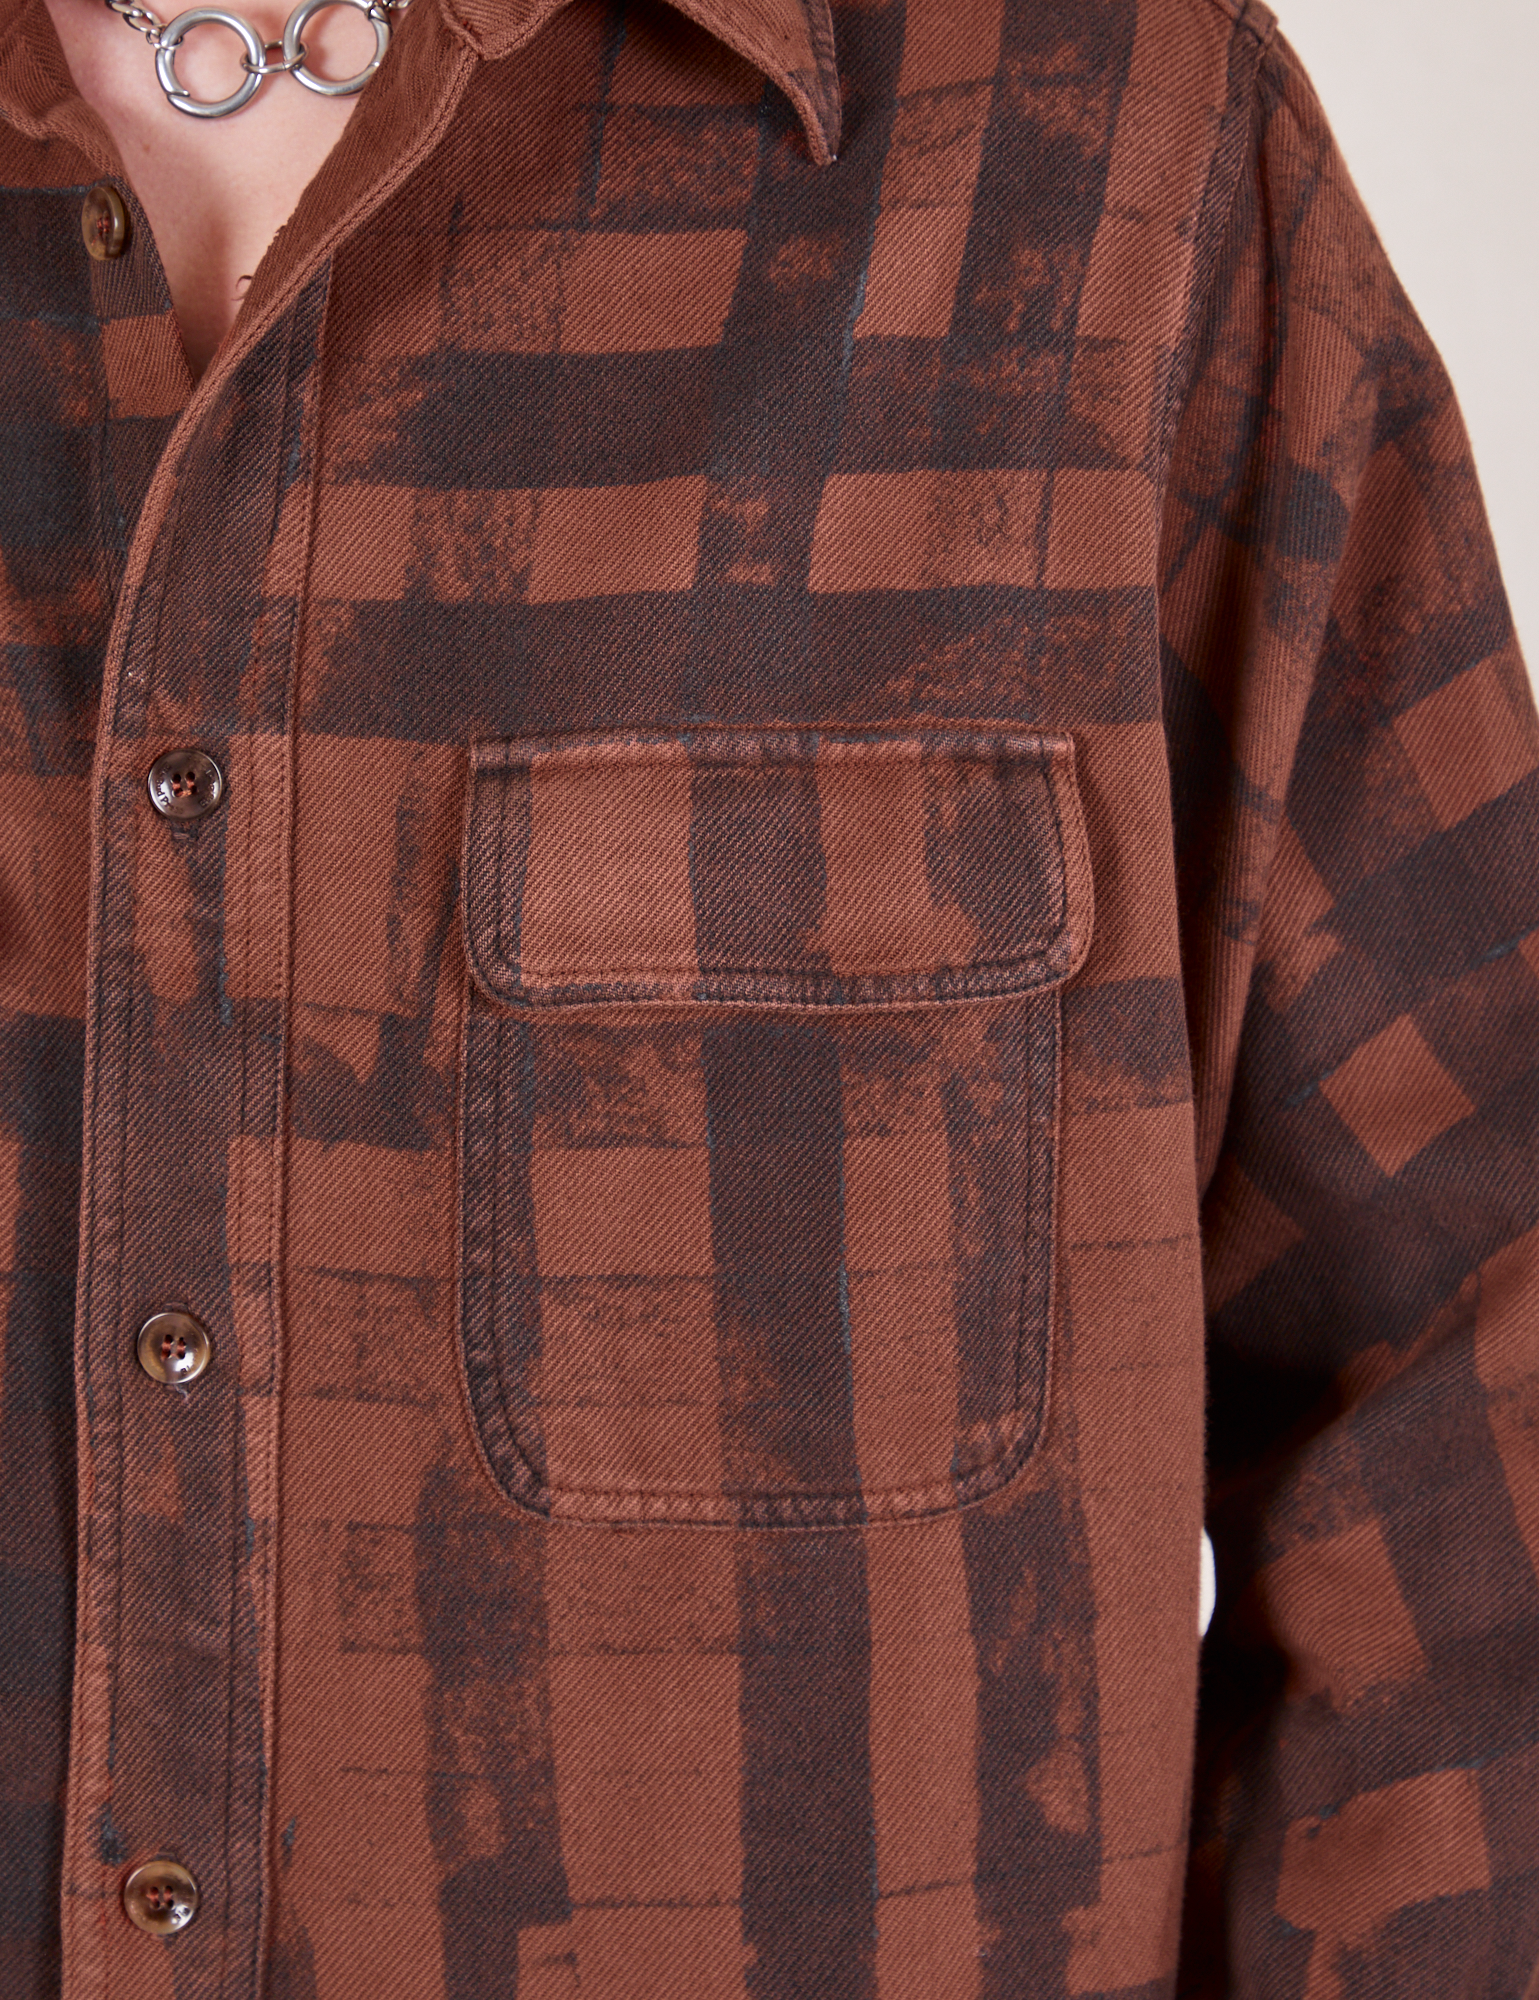 Front pocket closed up of Plaid Flannel Overshirt in Fudgesicle Brown on Alex